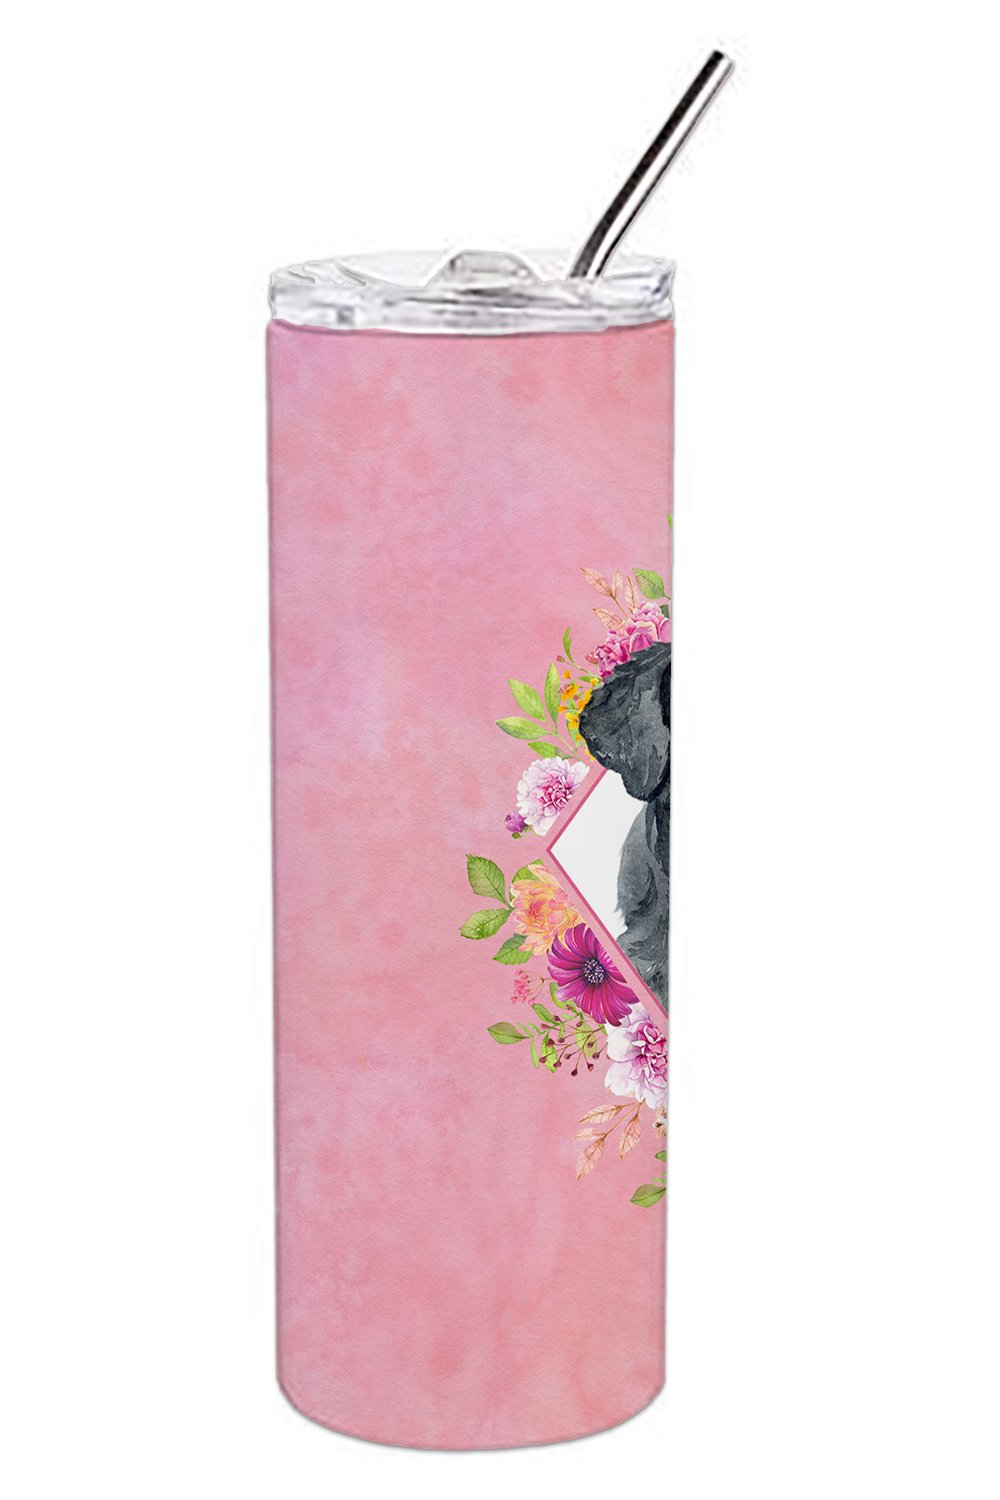 Giant Schnauzer Pink Flowers Double Walled Stainless Steel 20 oz Skinny Tumbler CK4178TBL20 by Caroline's Treasures